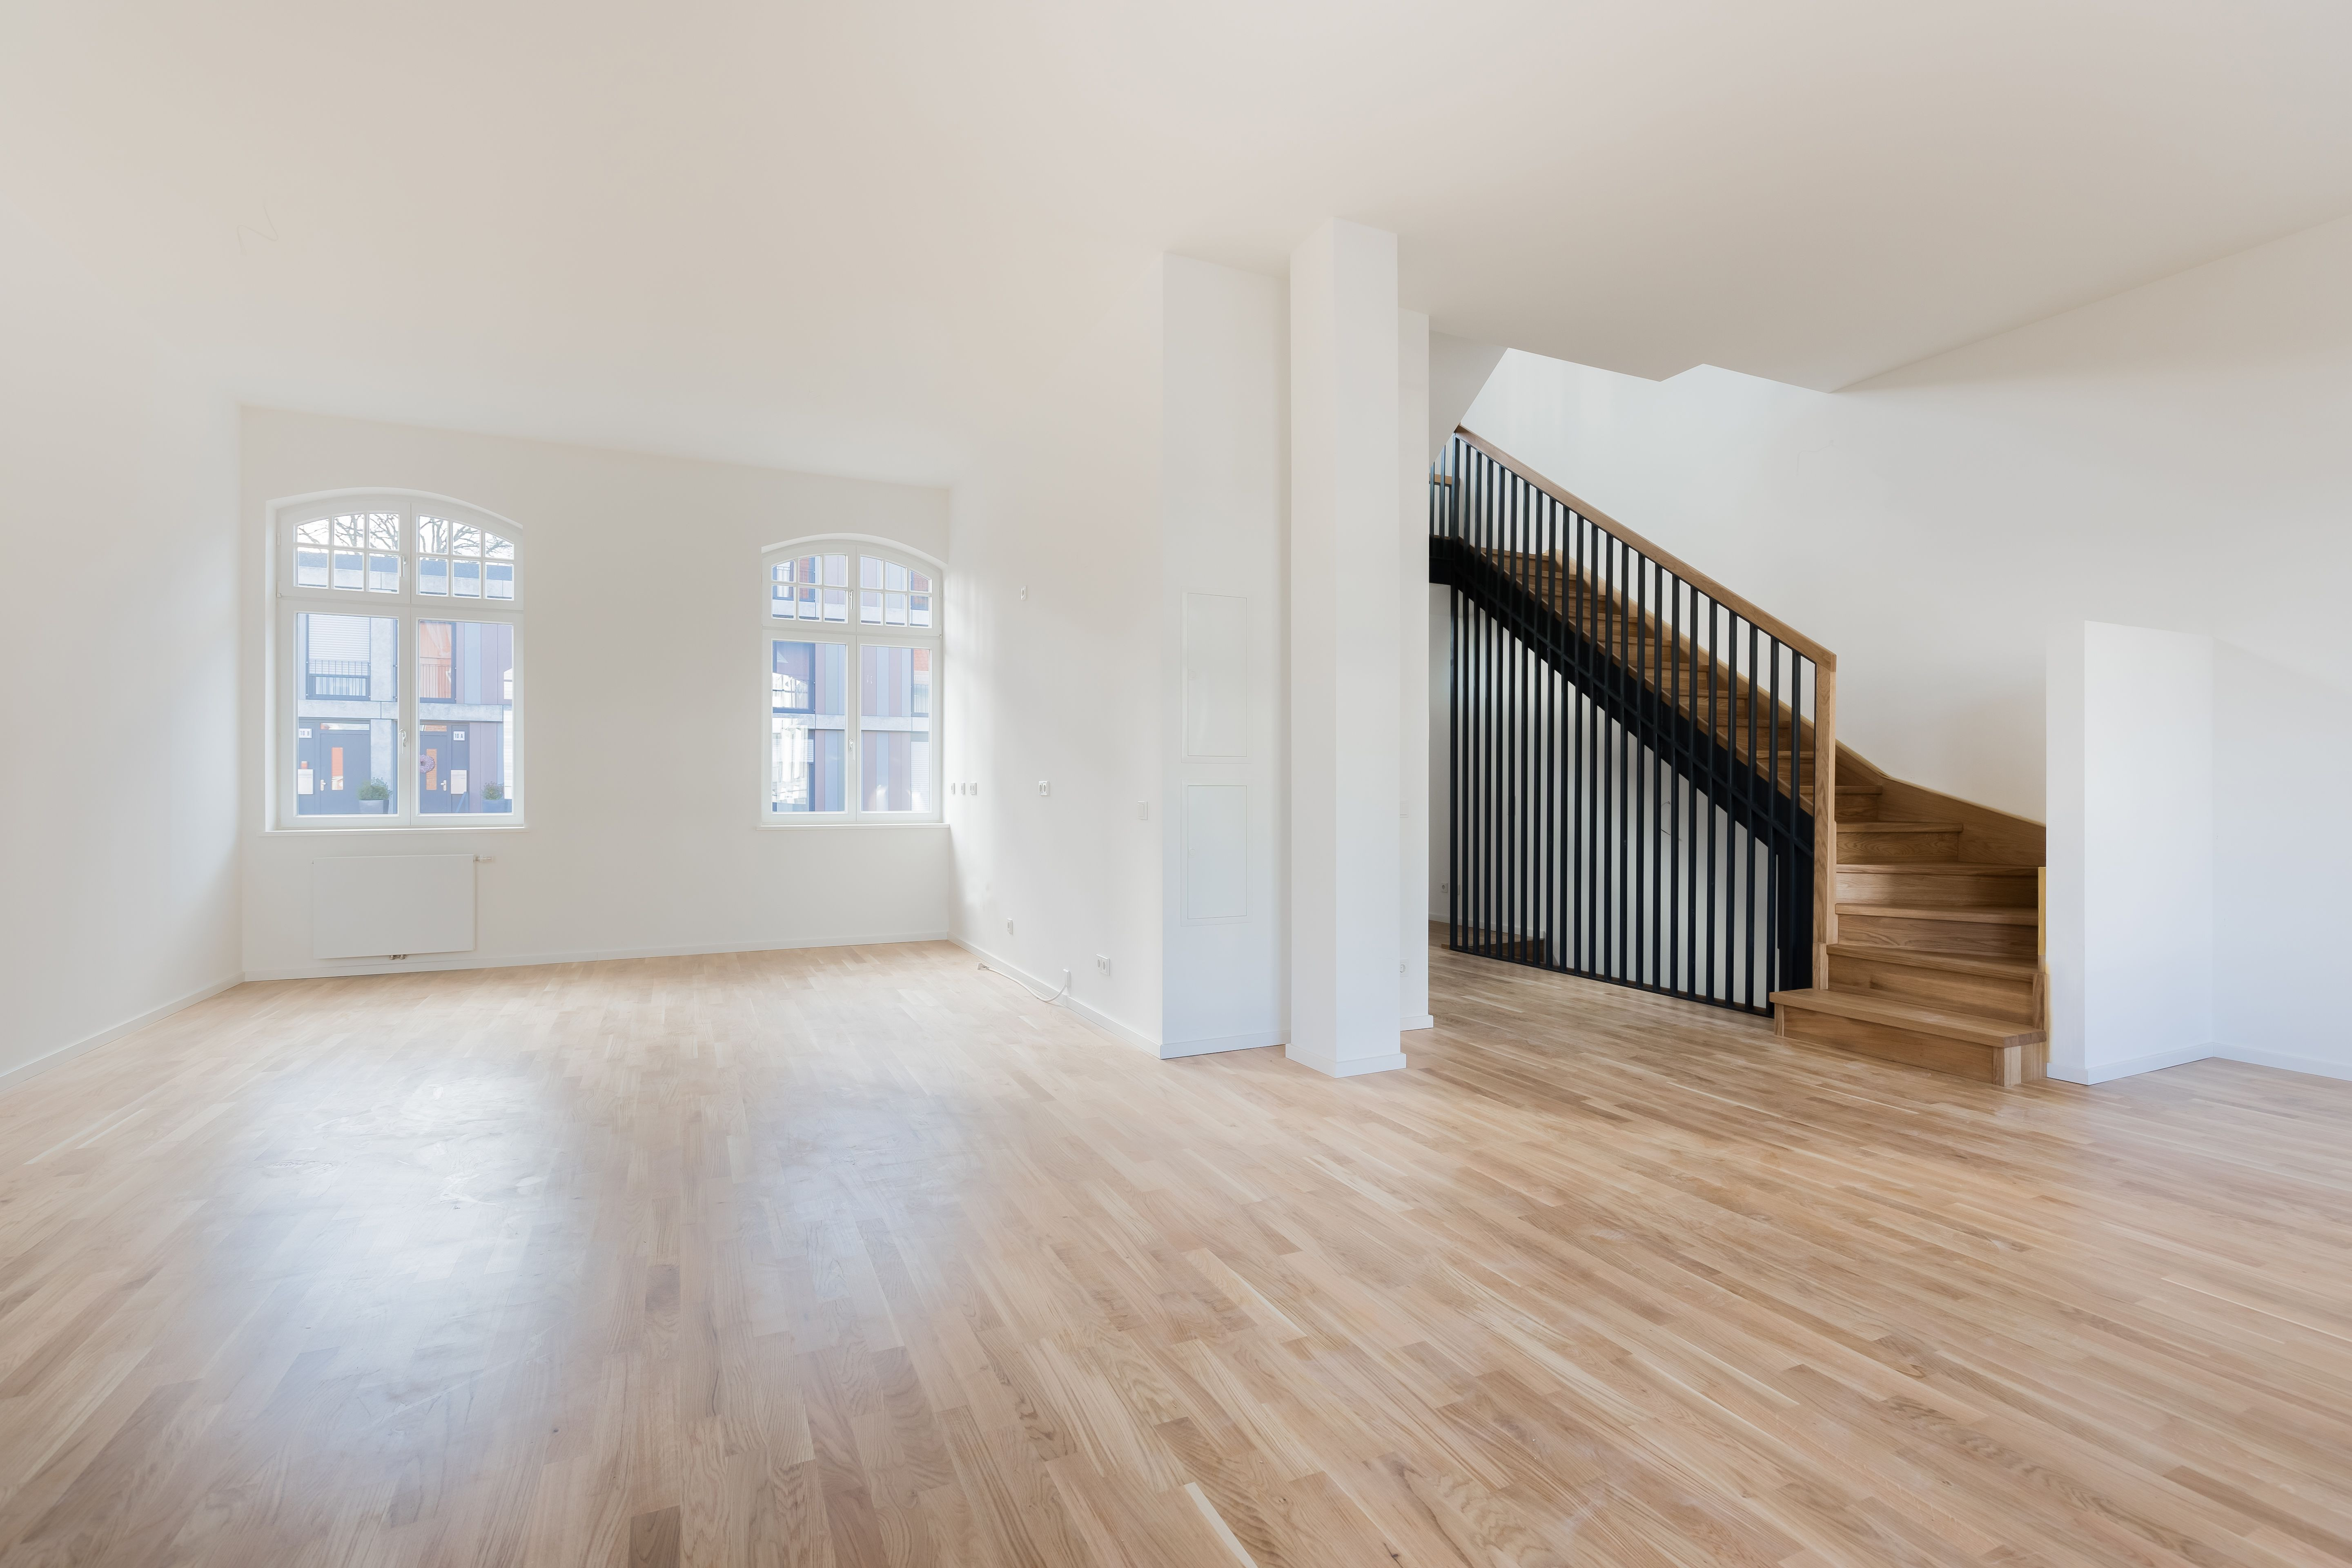 17 Stylish Cost Of Hardwood Flooring Per Square Foot Canada 2024 free download cost of hardwood flooring per square foot canada of do i need a vacancy permit for my property with villa interior hdr 638940238 5aae6f8afa6bcc0036f7b02c